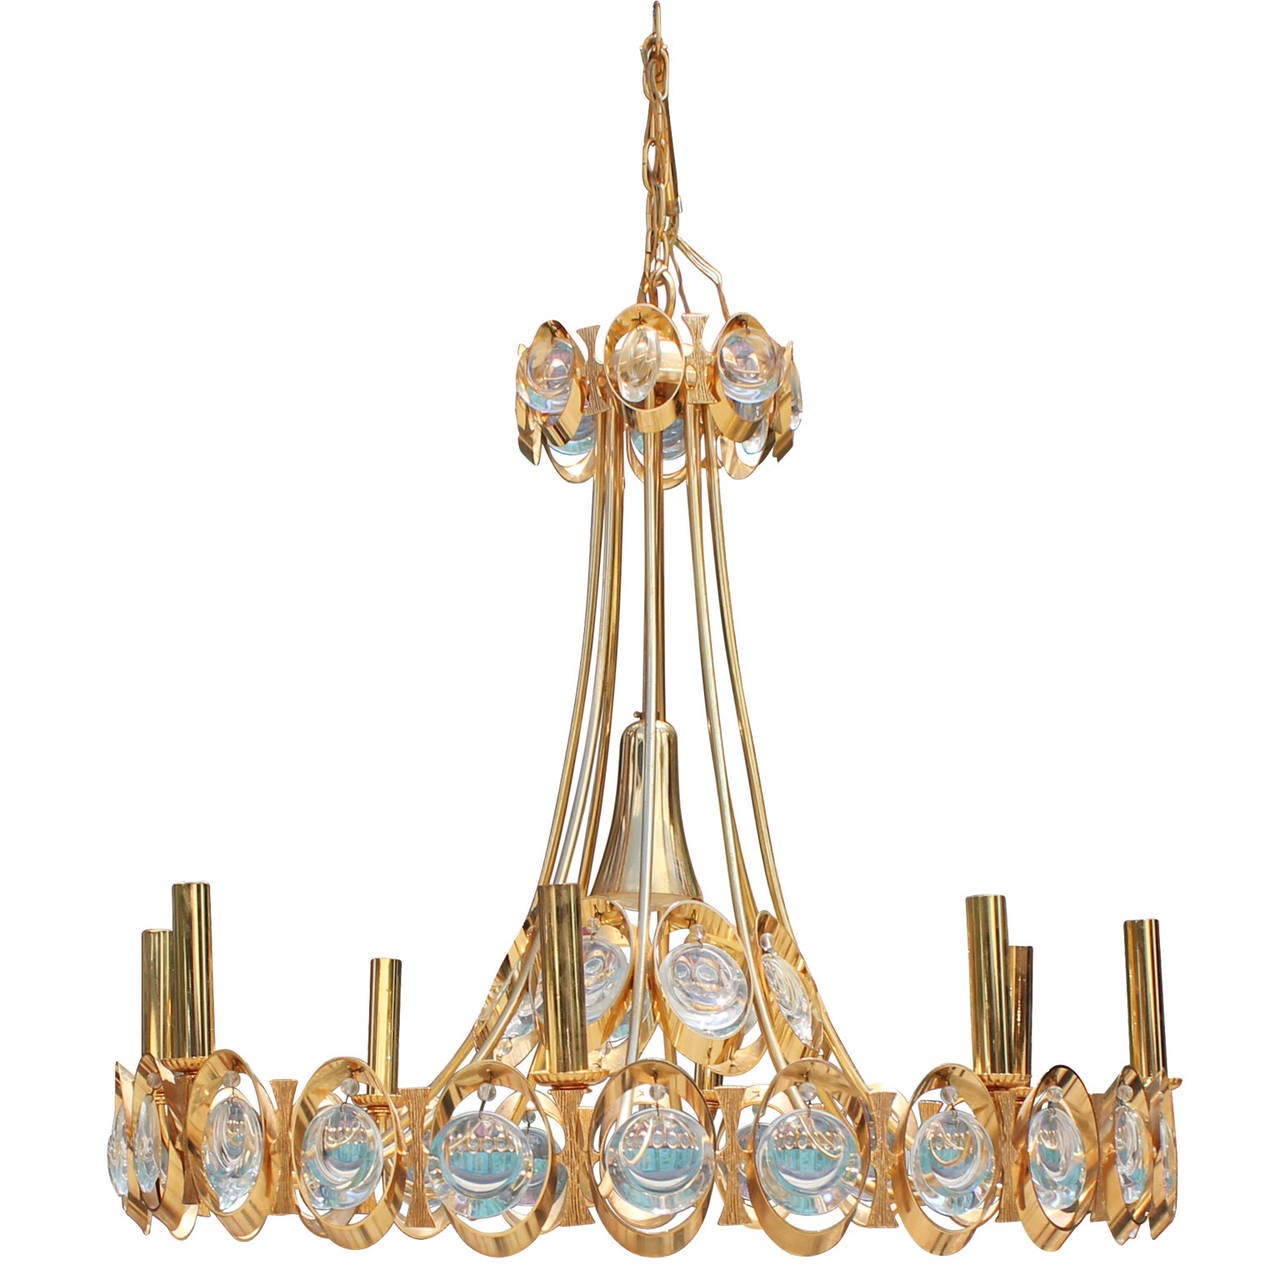 Beautiful Hollywood Regency Sciolari style chandelier by Palwa. Chandelier is plated in 24-carat gold on a brass frame. Round Gem like glass add an extra sparkle. Small Downlight in the middle adds a nice light.